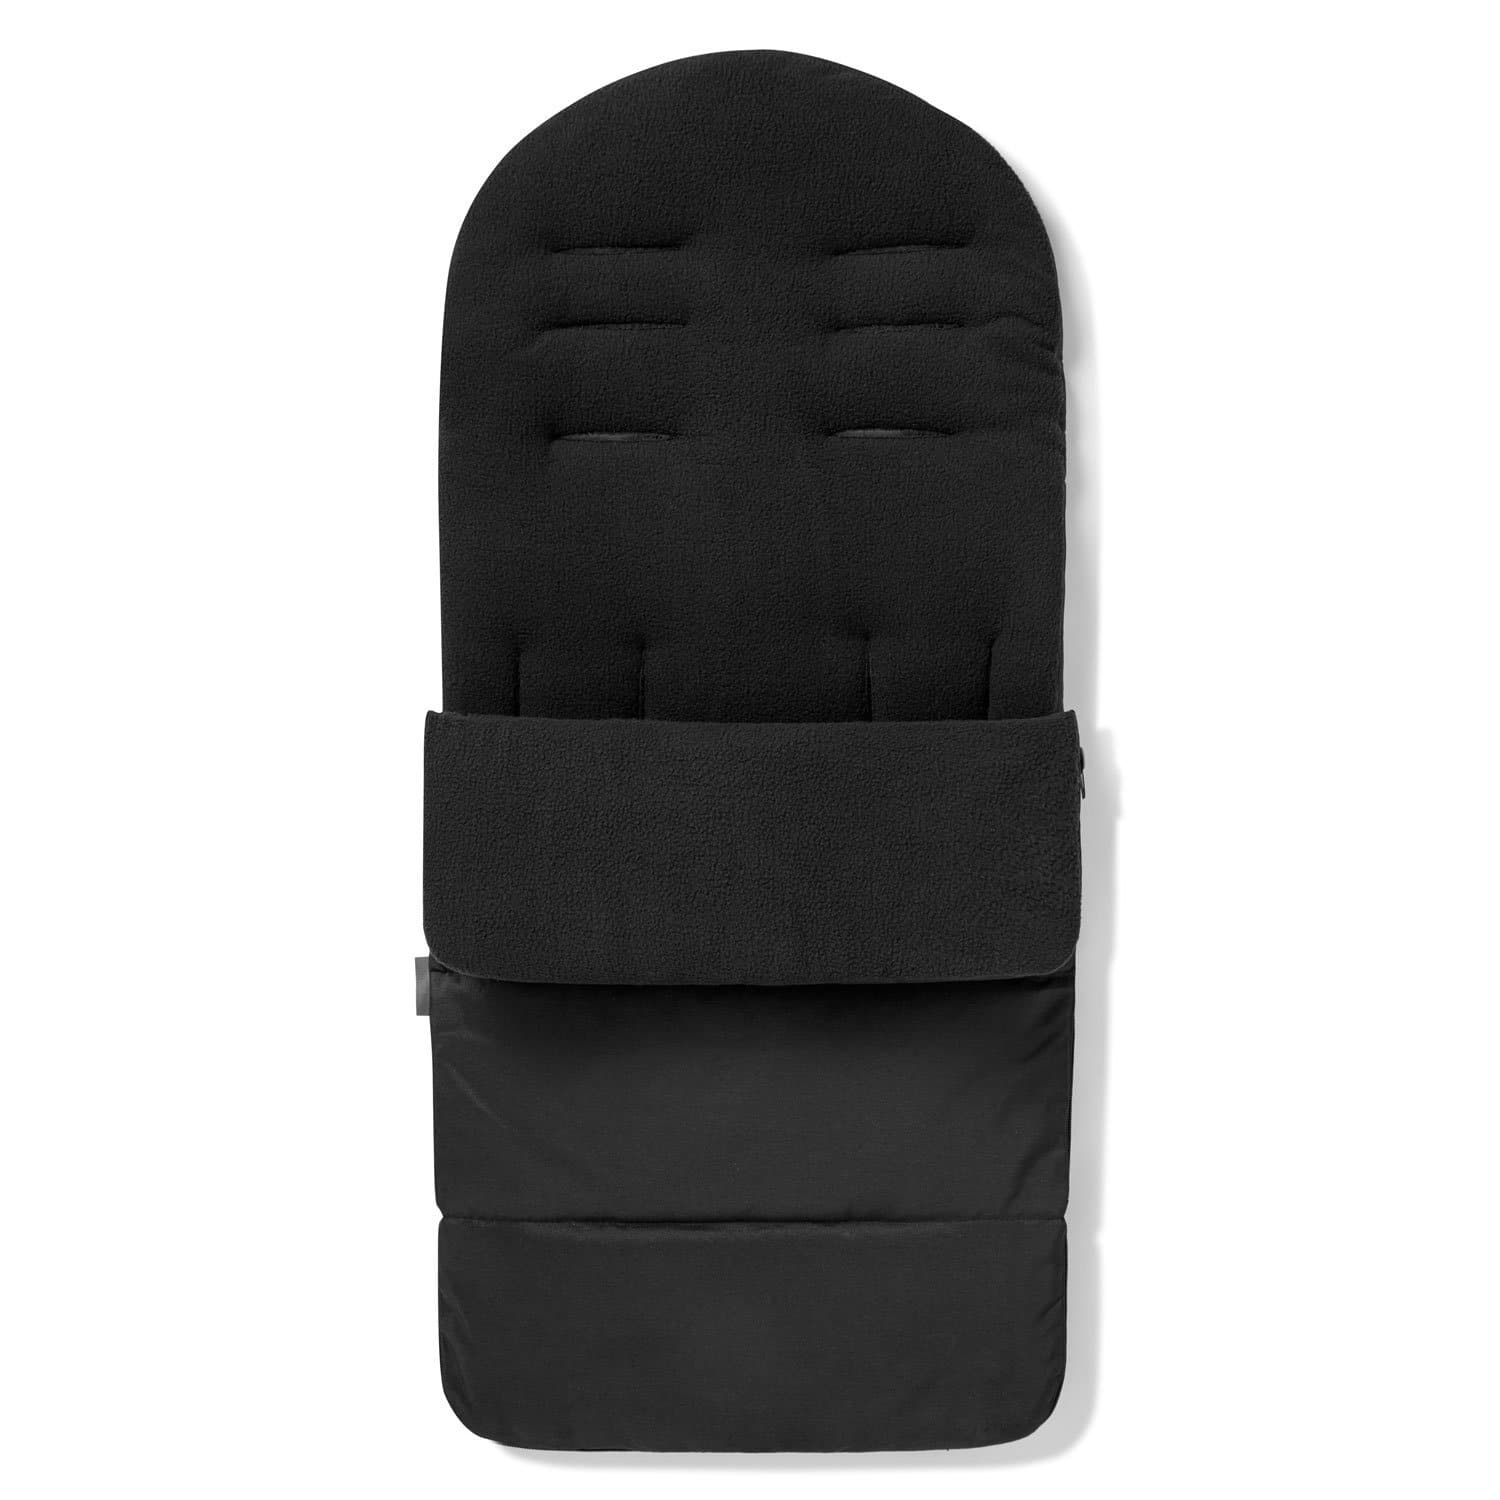 Premium Footmuff / Cosy Toes Compatible with Urban Detour - Black Jack / Fits All Models | For Your Little One